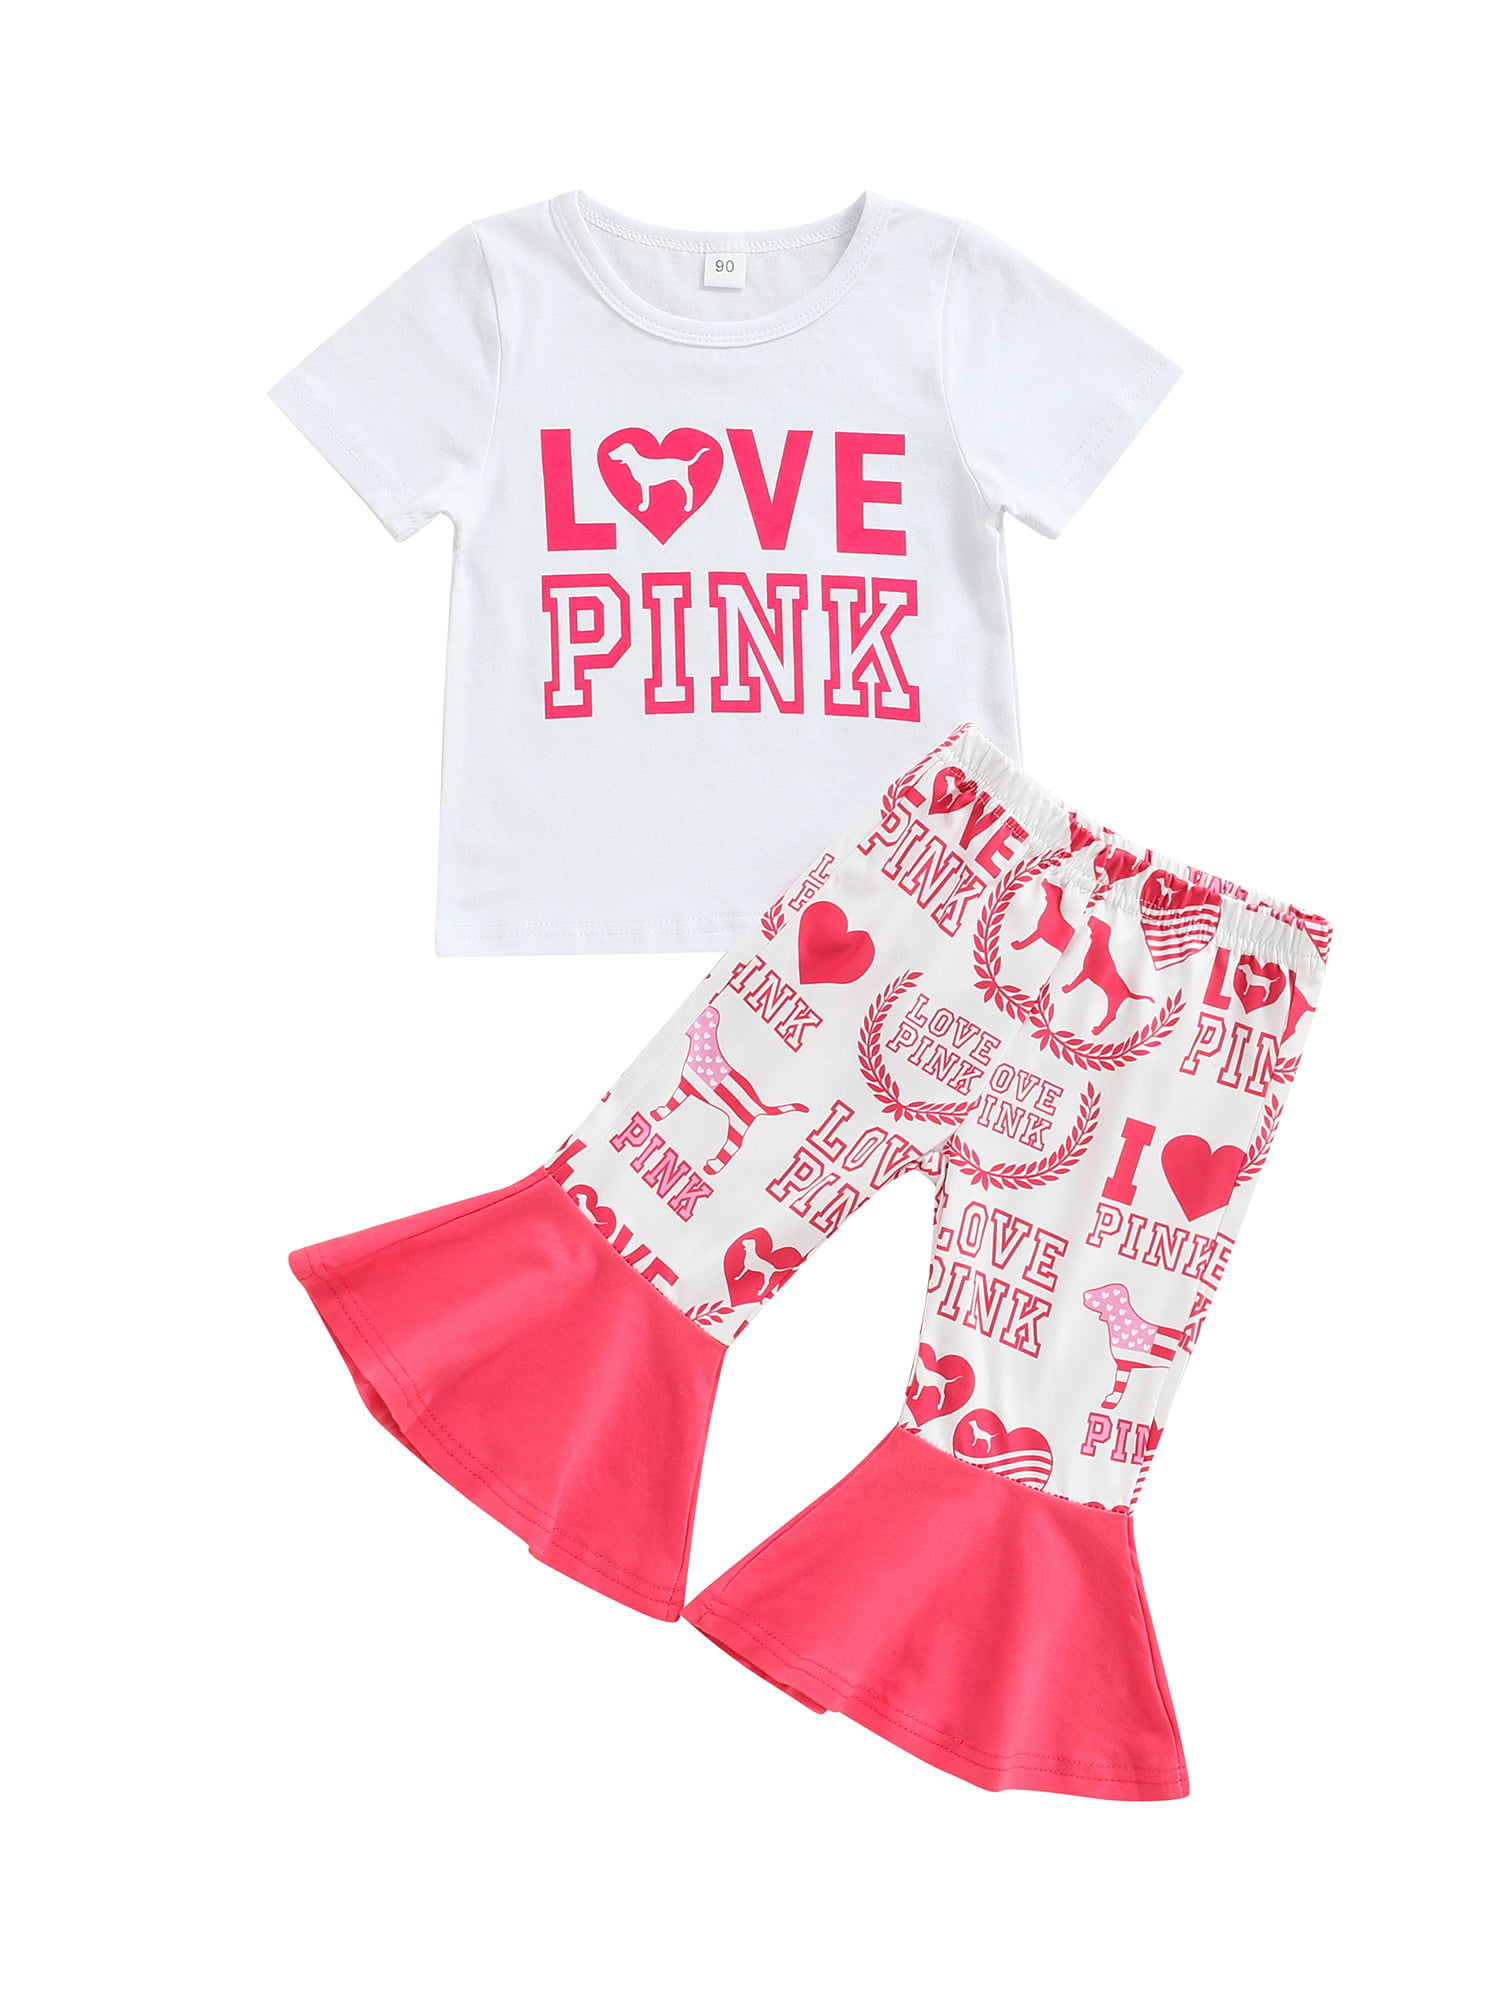 Child Kids Clothes Baby Girl Valentine's Day Letter Print Splice Tops Blouse Tee 